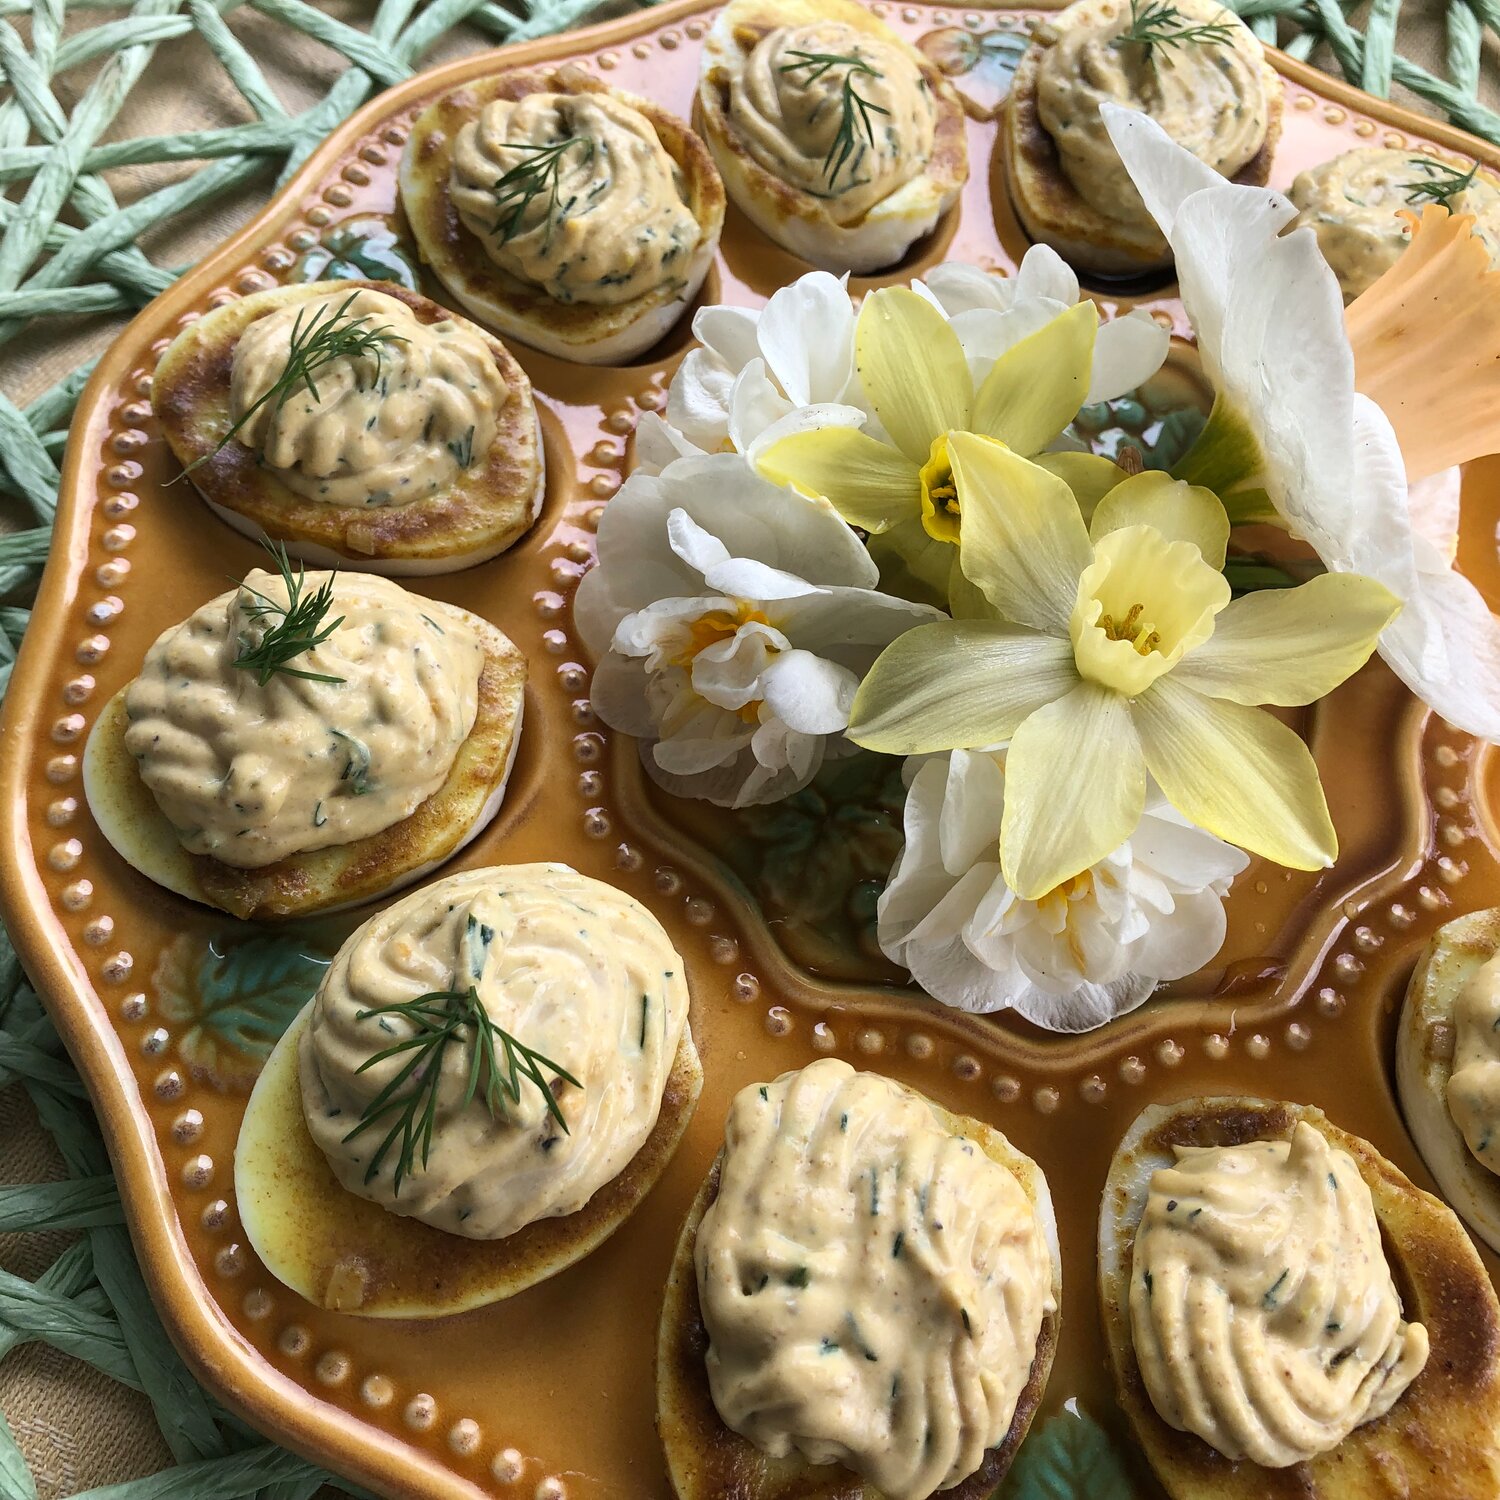 Deviled eggs, with their bright yellow centers are common daffodil picnic fare, but the flavor of these are enhanced by the use of curry in the filling.